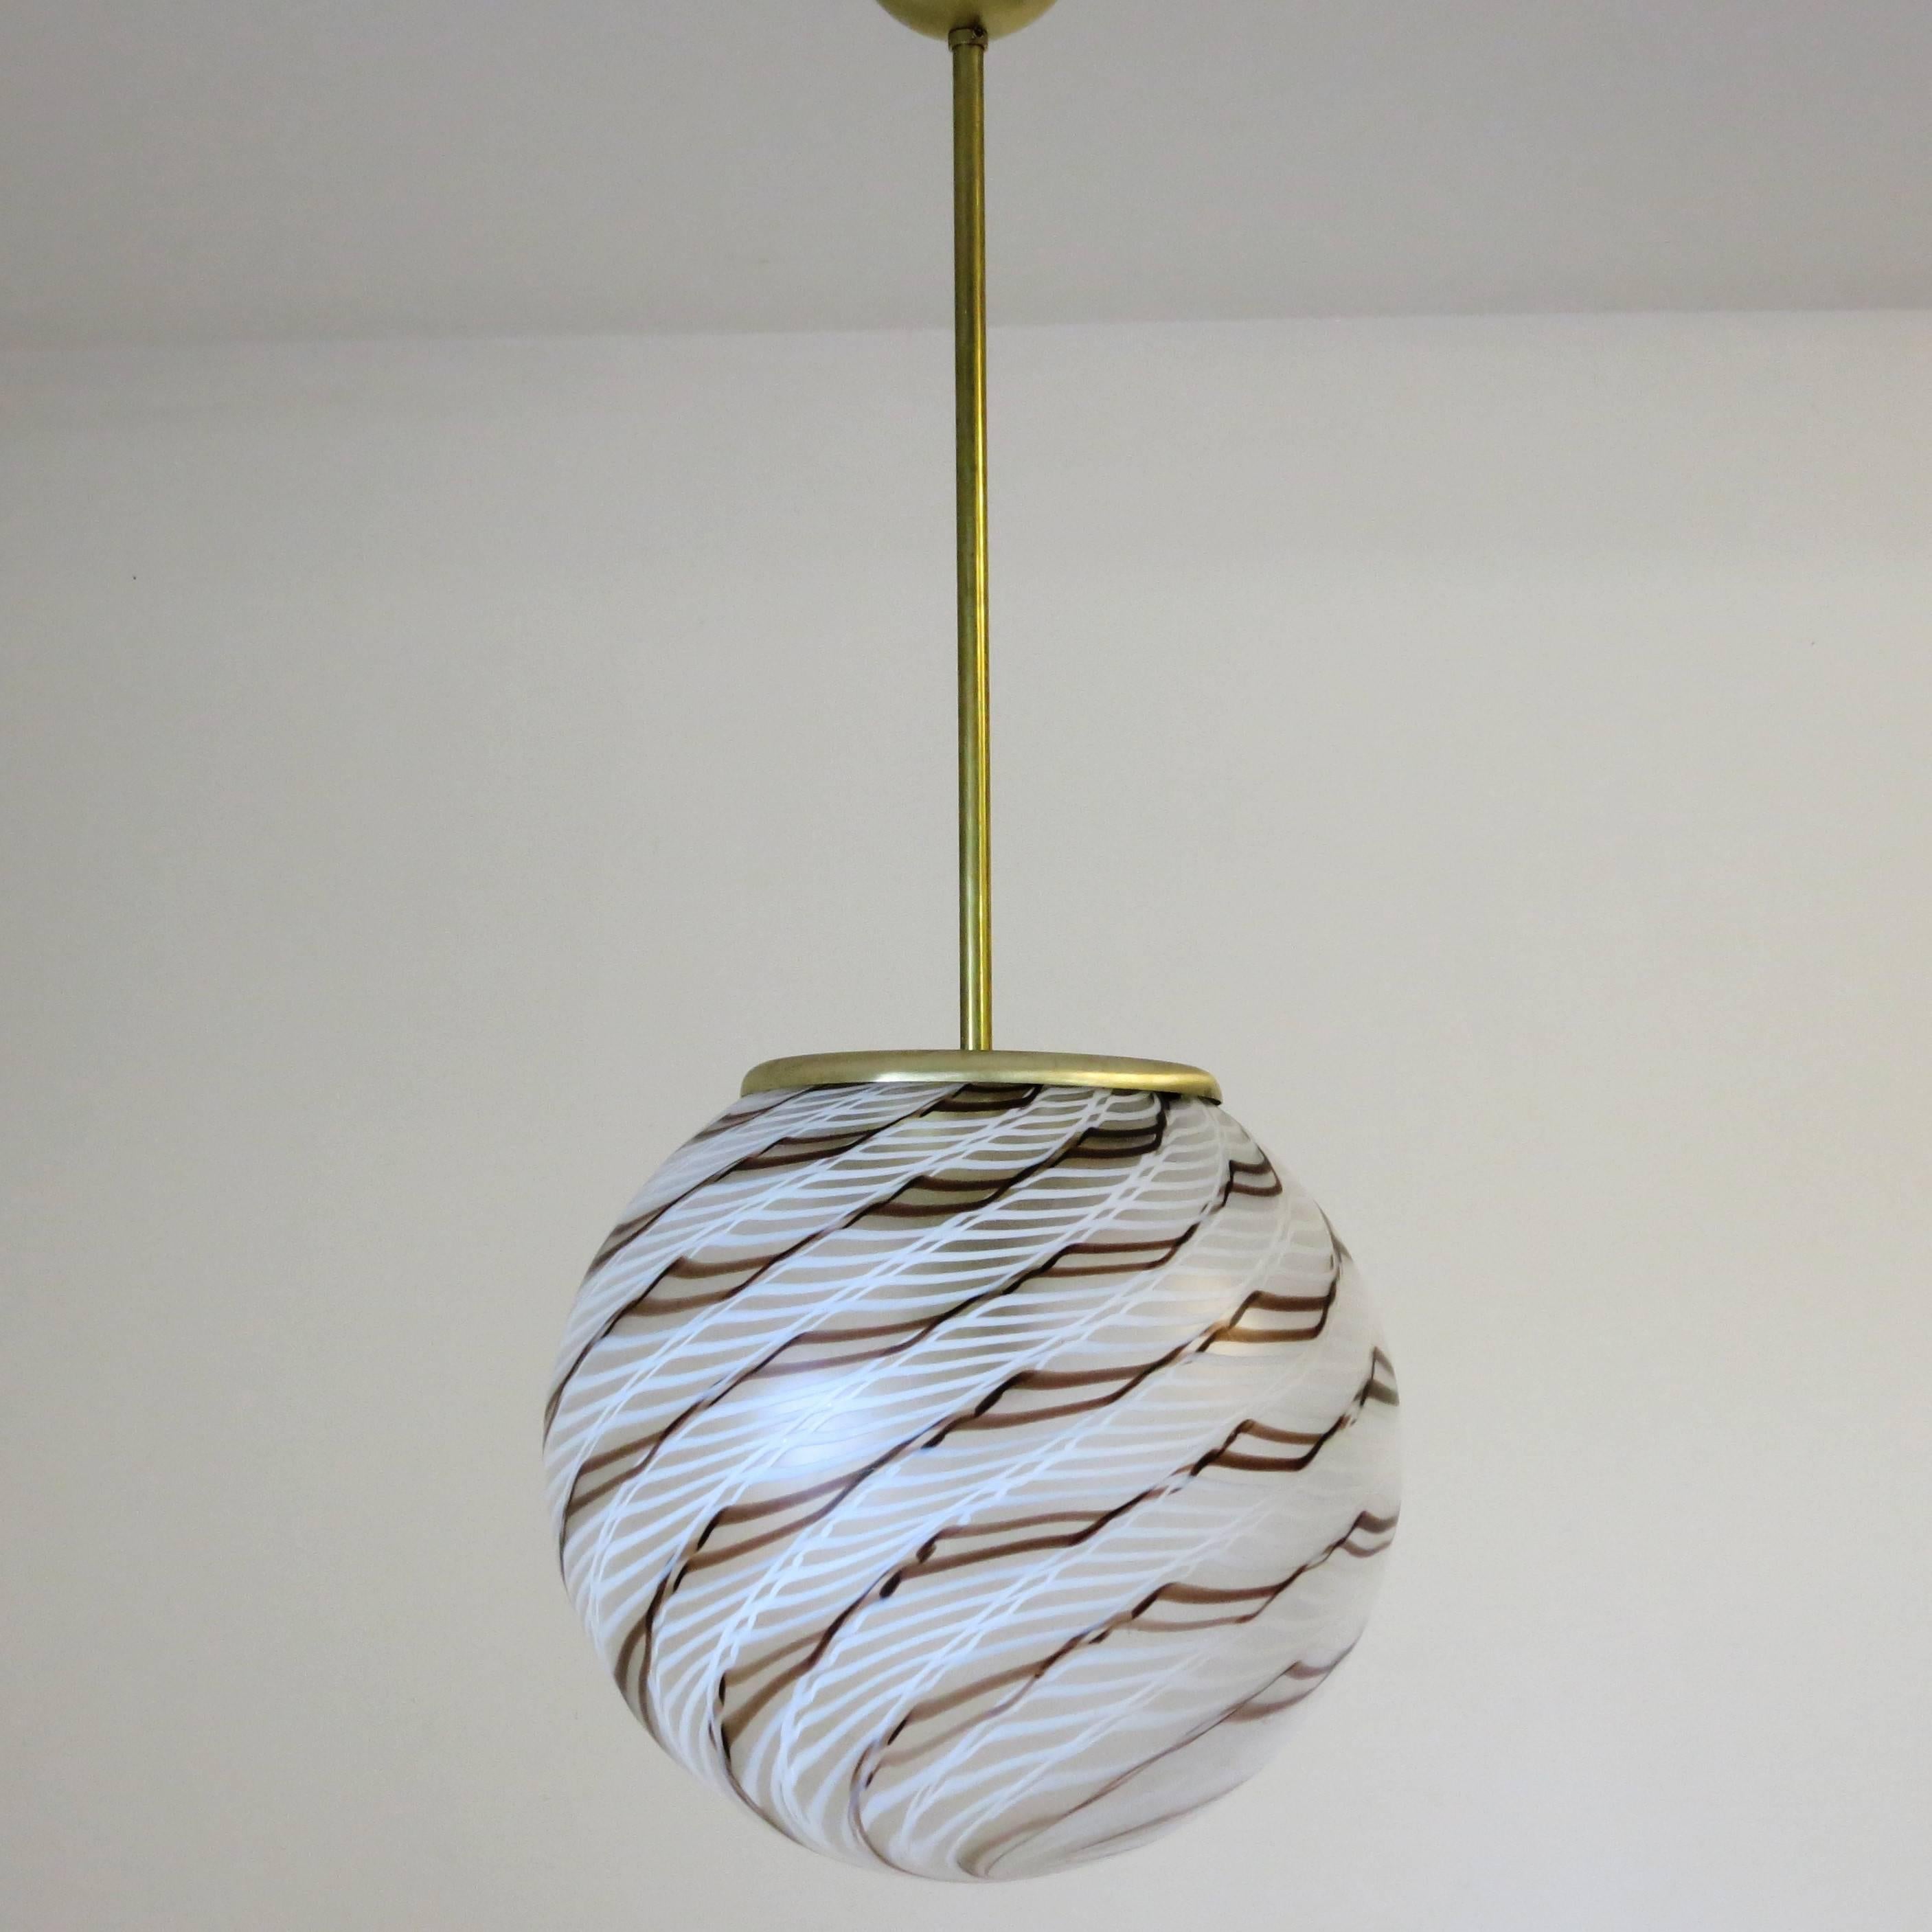 Vintage Italian pendant with frosted Murano glass globe and artistic chocolate brown and vanilla white stripes spiral design, mounted on brass hardware / Designed by La Murrina circa 1960’s
1 light / E26 or E27 type / max 60W
Diameter: 15.75 inches